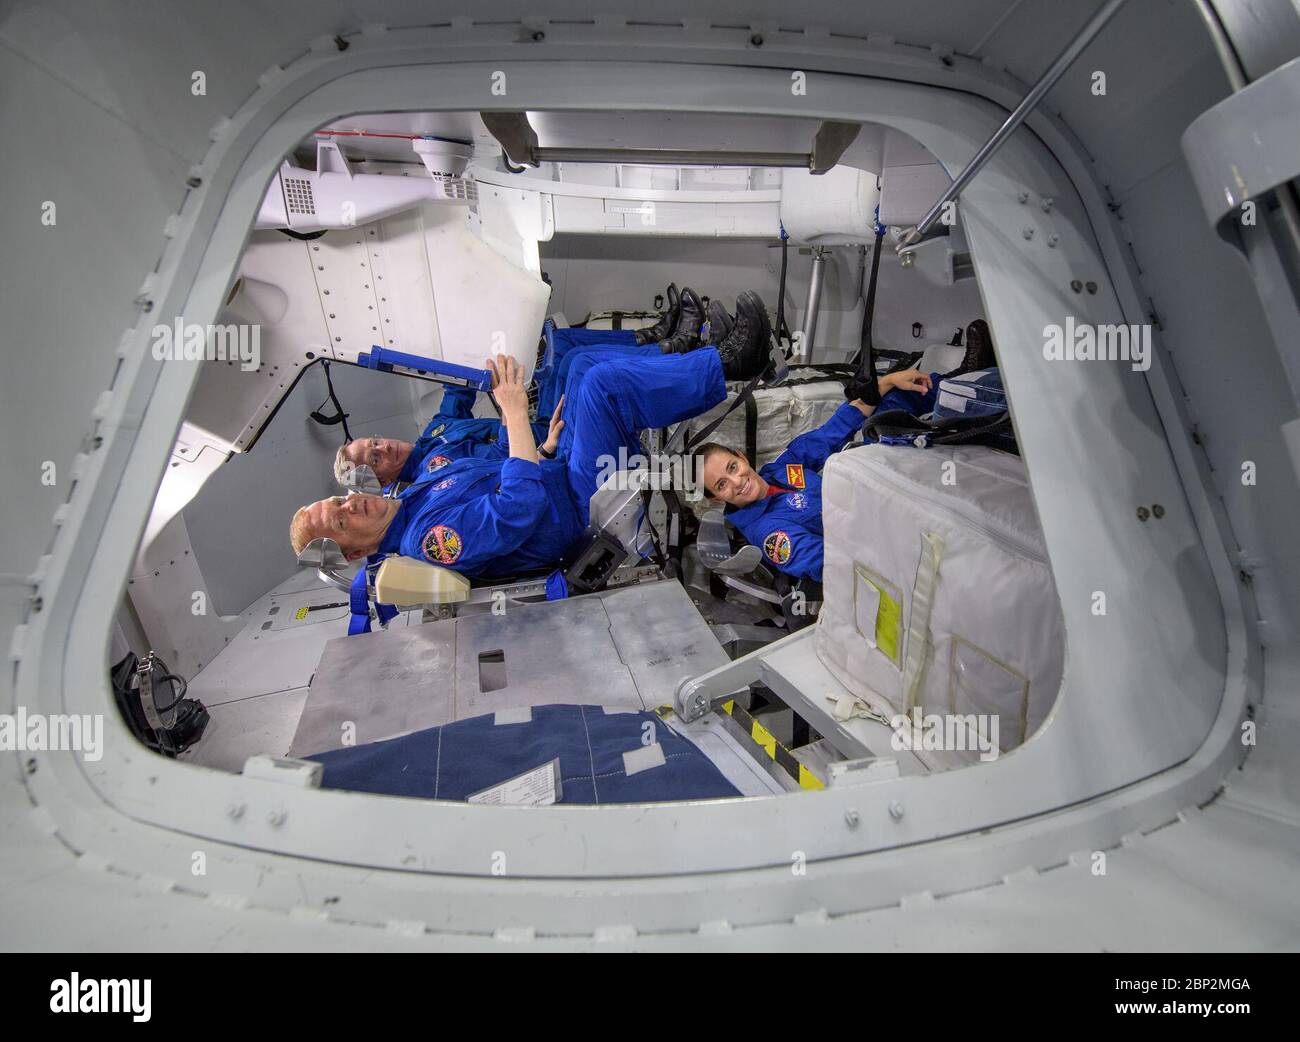 Commercial Crew Program  NASA astronauts Eric Boe, foreground left, and Nicole Mann, foreground right, along with Boeing astronaut Chris Ferguson, background, pose for a photograph inside the Boeing Mockup Trainer at NASA’s Johnson Space Center in Houston, Texas on Aug. 2, 2018 ahead of the commercial crew flight assignments announcement Aug. 3. The three were assigned to launch aboard Boeing’s CST-100 Starliner on the company’s Crew Flight Test targeted for mid-2019 in partnership with NASA’s Commercial Crew Program. Stock Photo